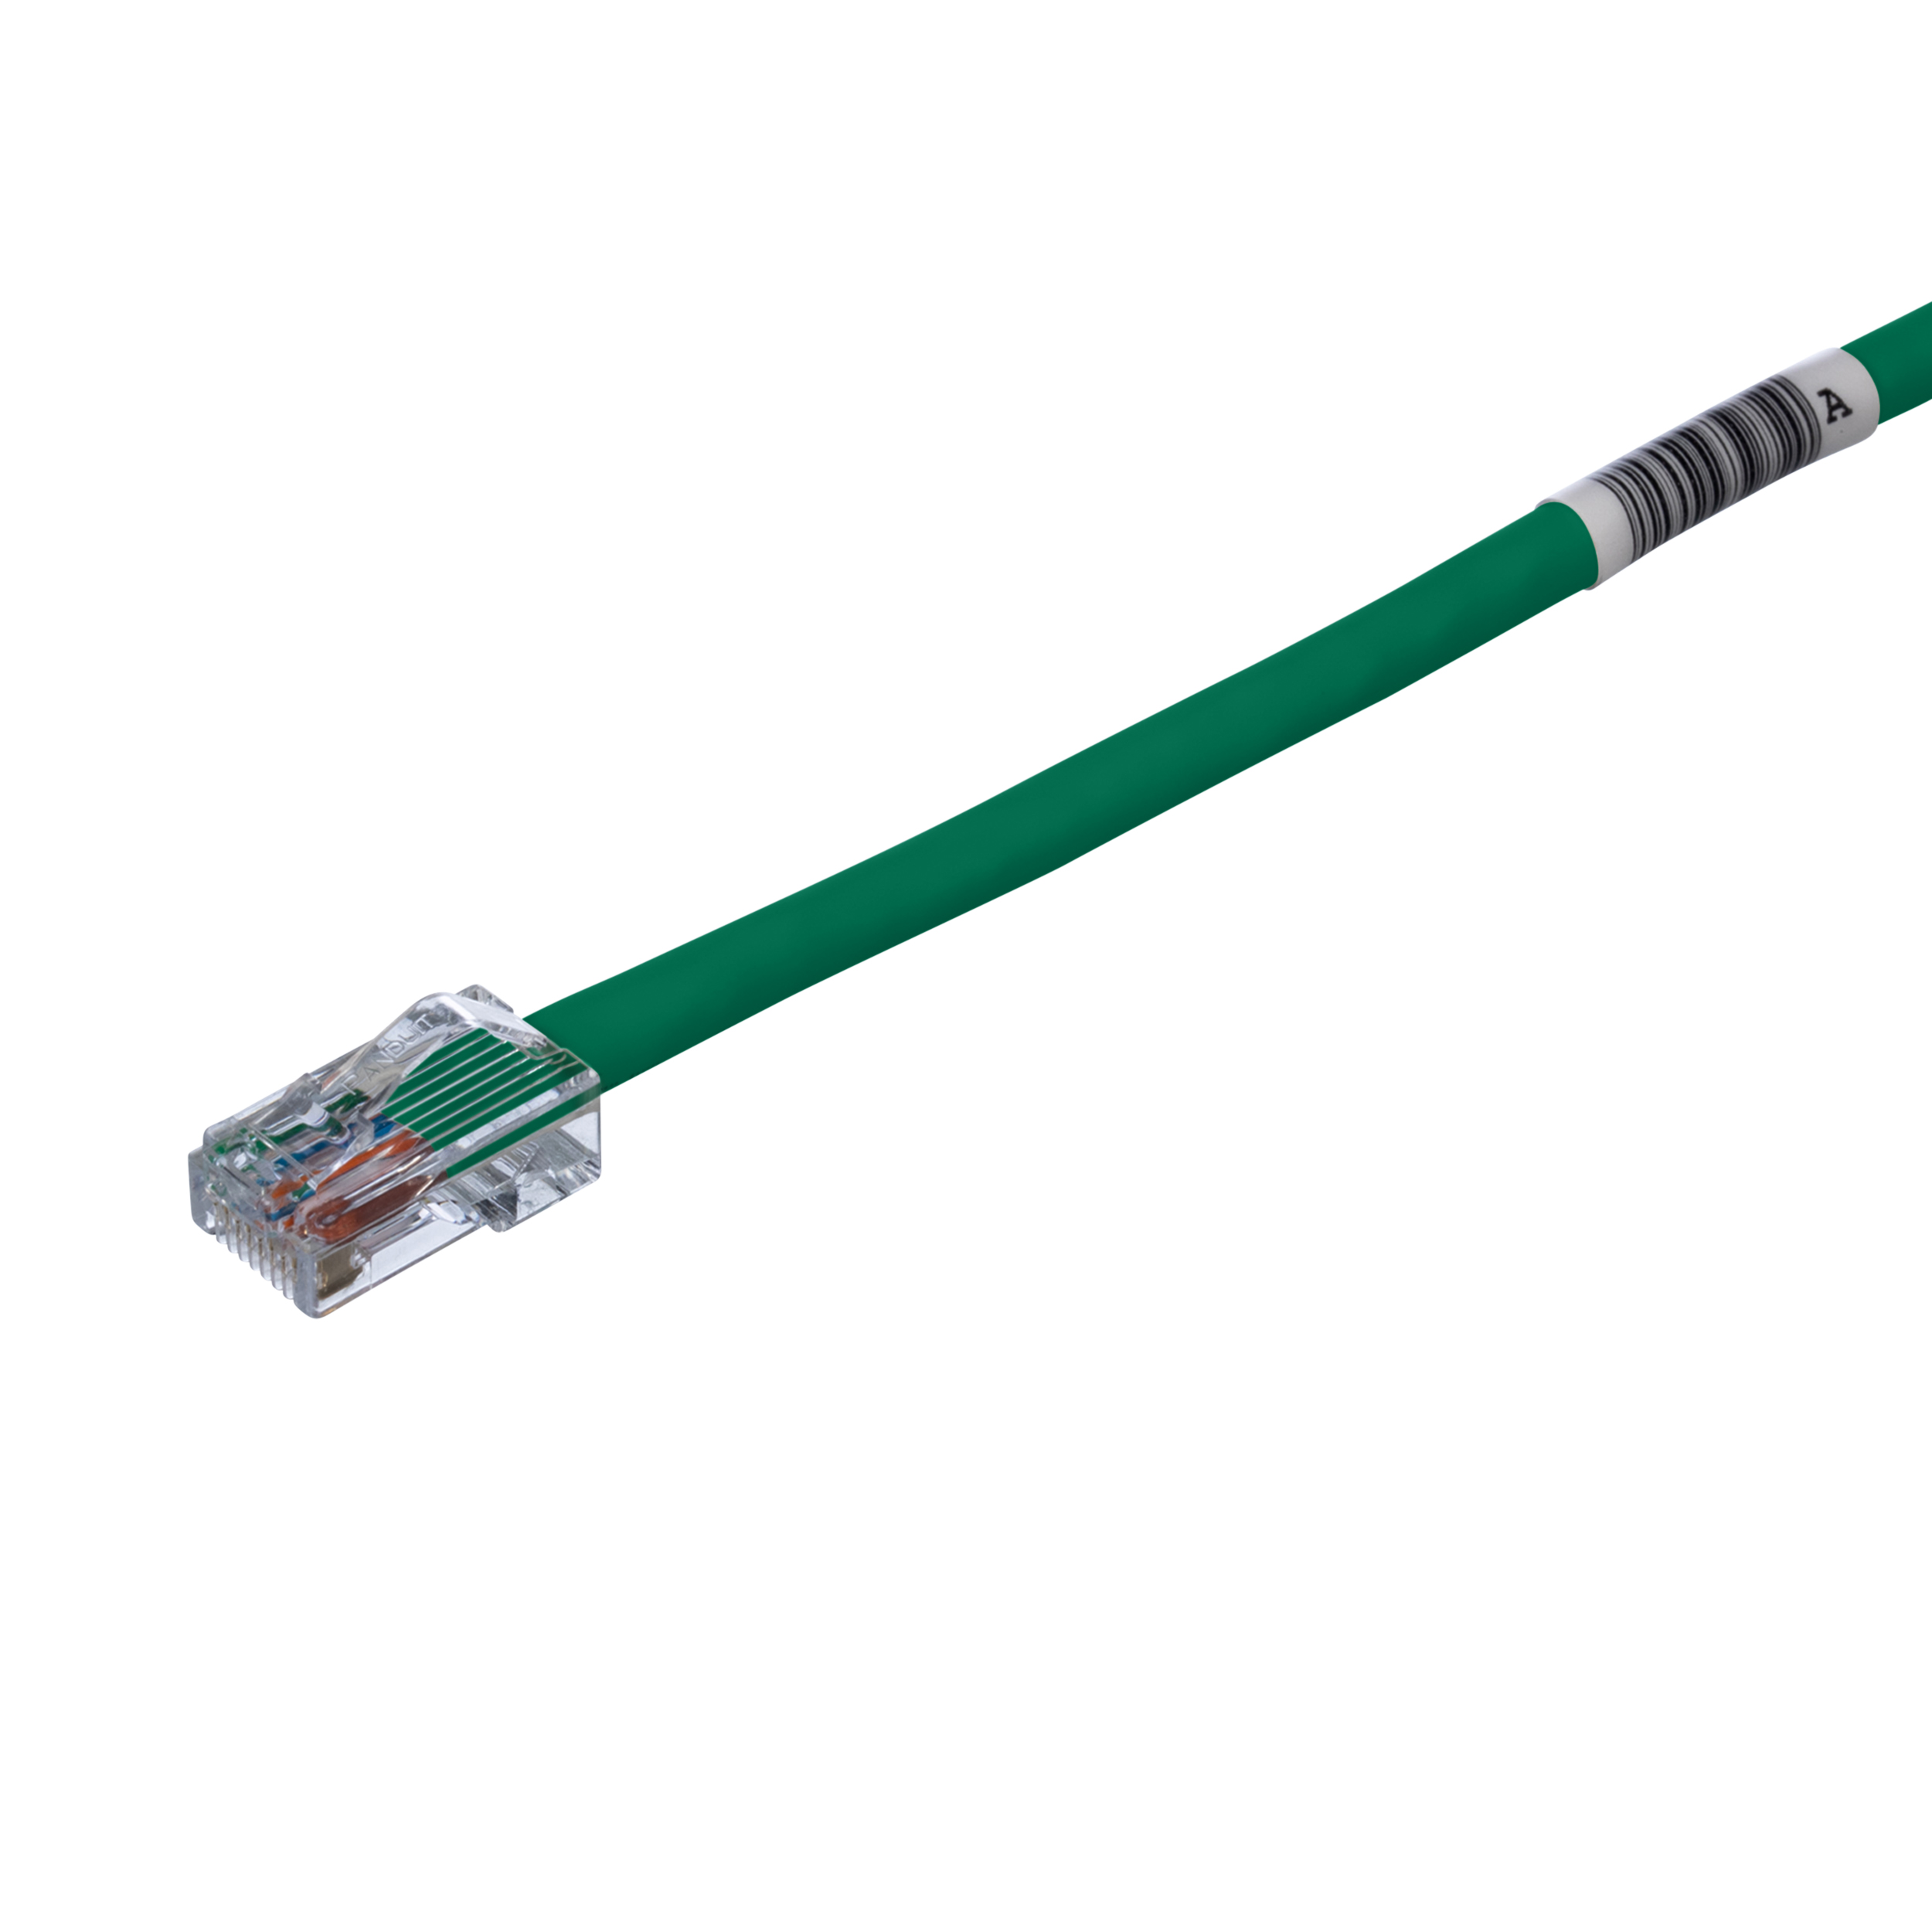 Cat 5e 24 AWG UTP Copper Patch Cord, 1 ft, Green